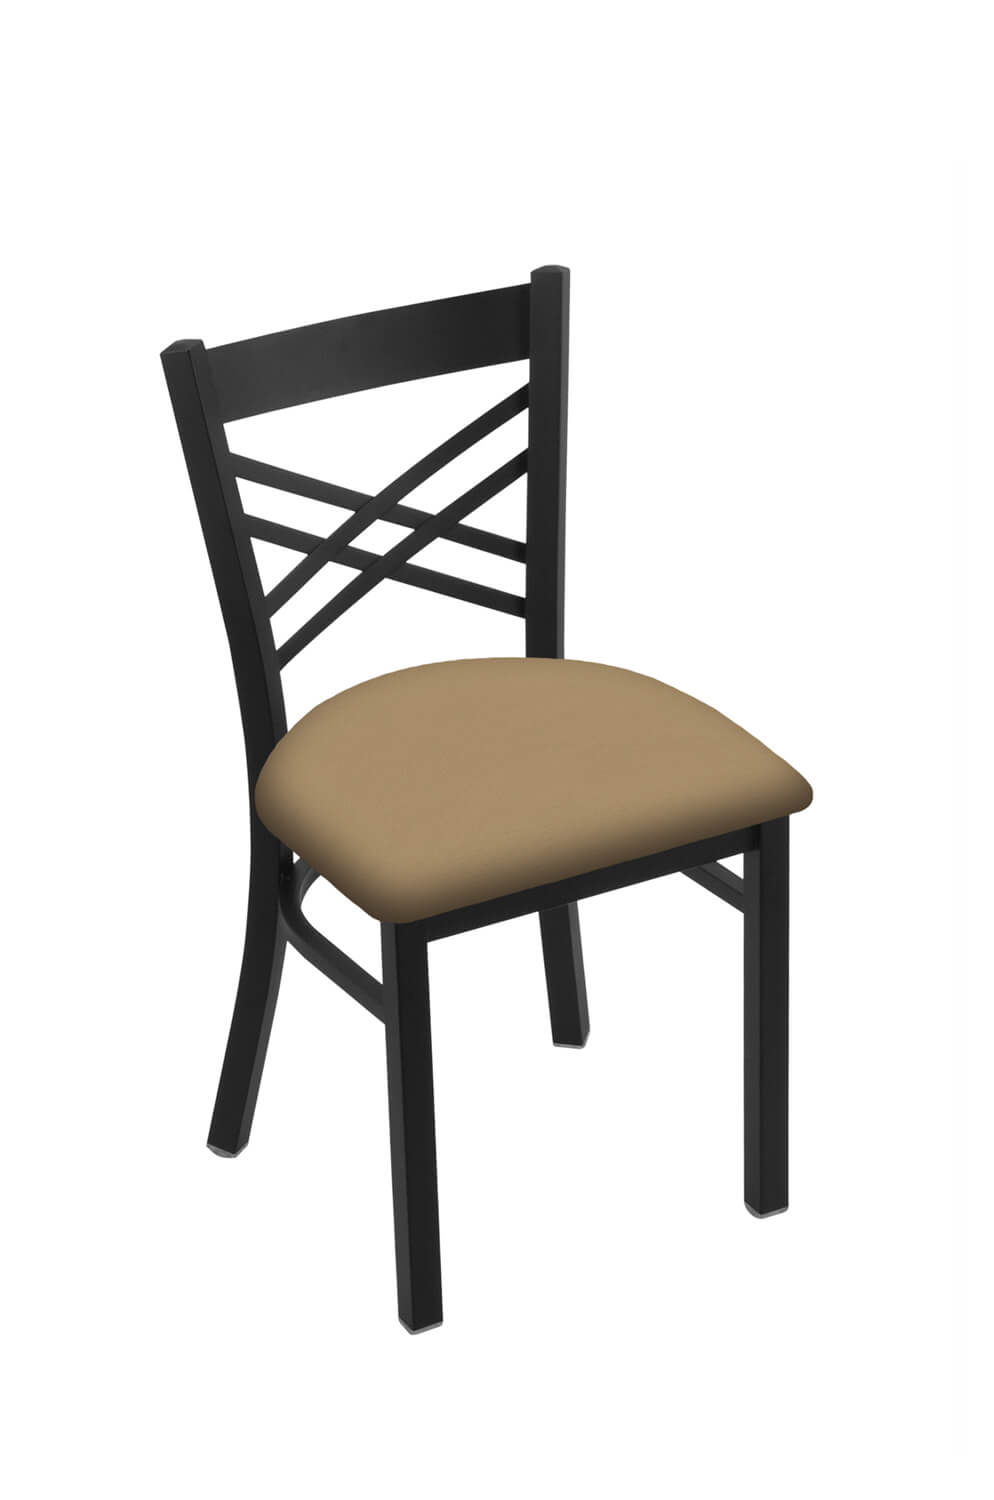 https://barstoolcomforts.com/wp-content/uploads/2017/05/holland-620-catalina-dining-chair-in-black-metal-finish-and-canter-sand-brown-seat-cushion.jpg